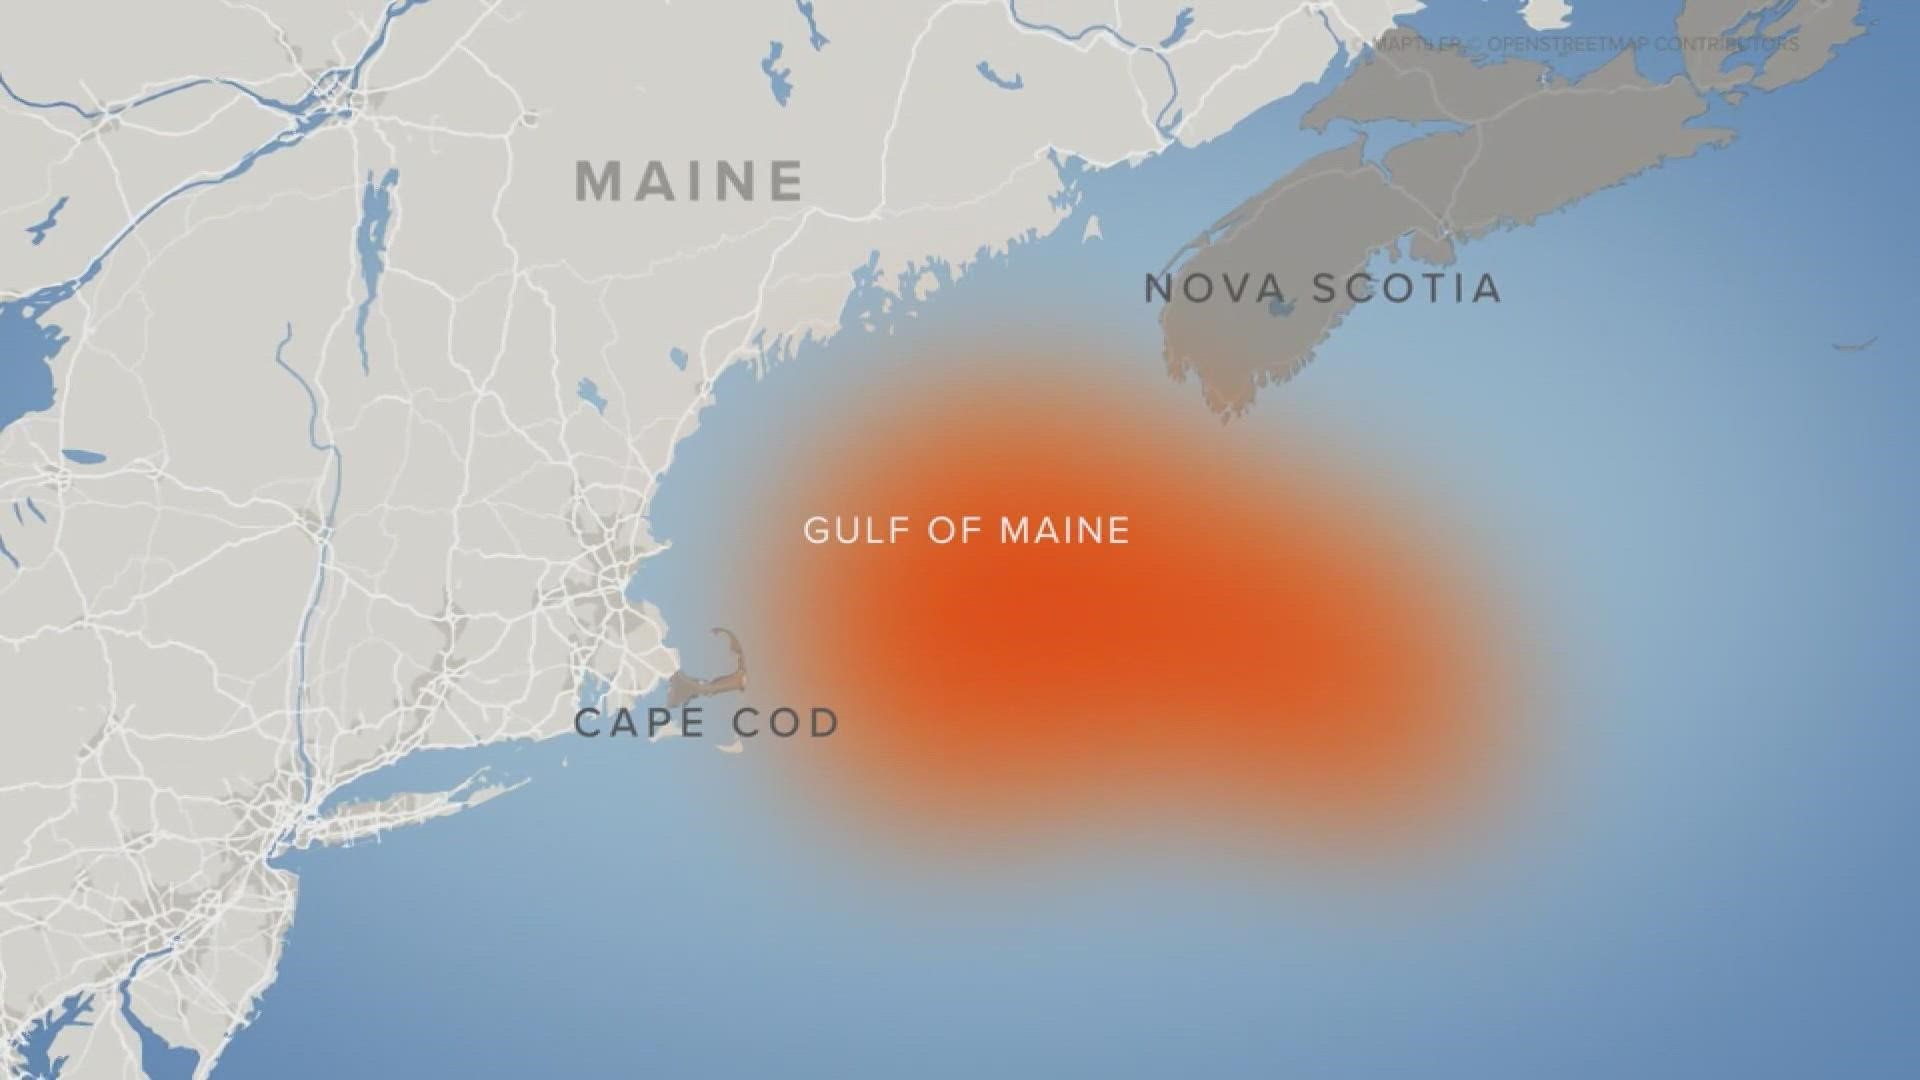 The water in the Gulf of Maine is warming faster than 96% of the world's oceans according to the Gulf of Maine Research Institute.